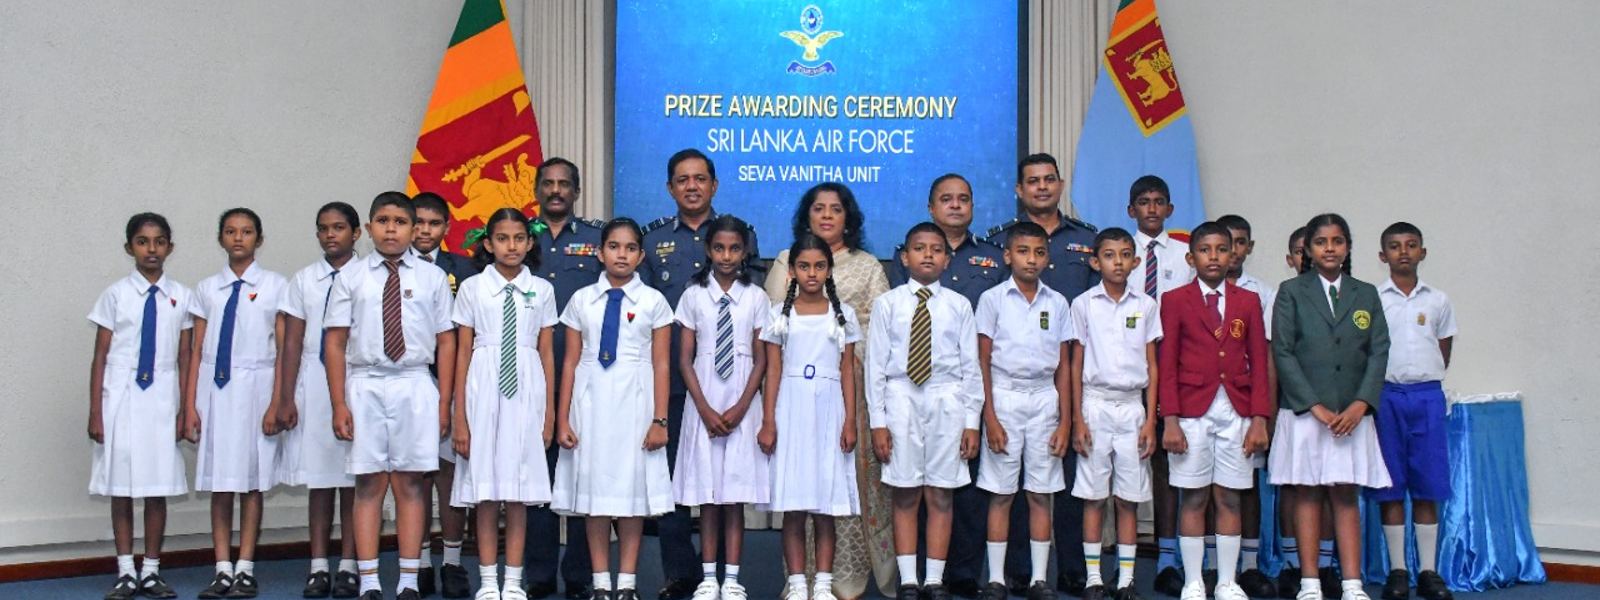 SLAF recognizes children who excelled G5 exam